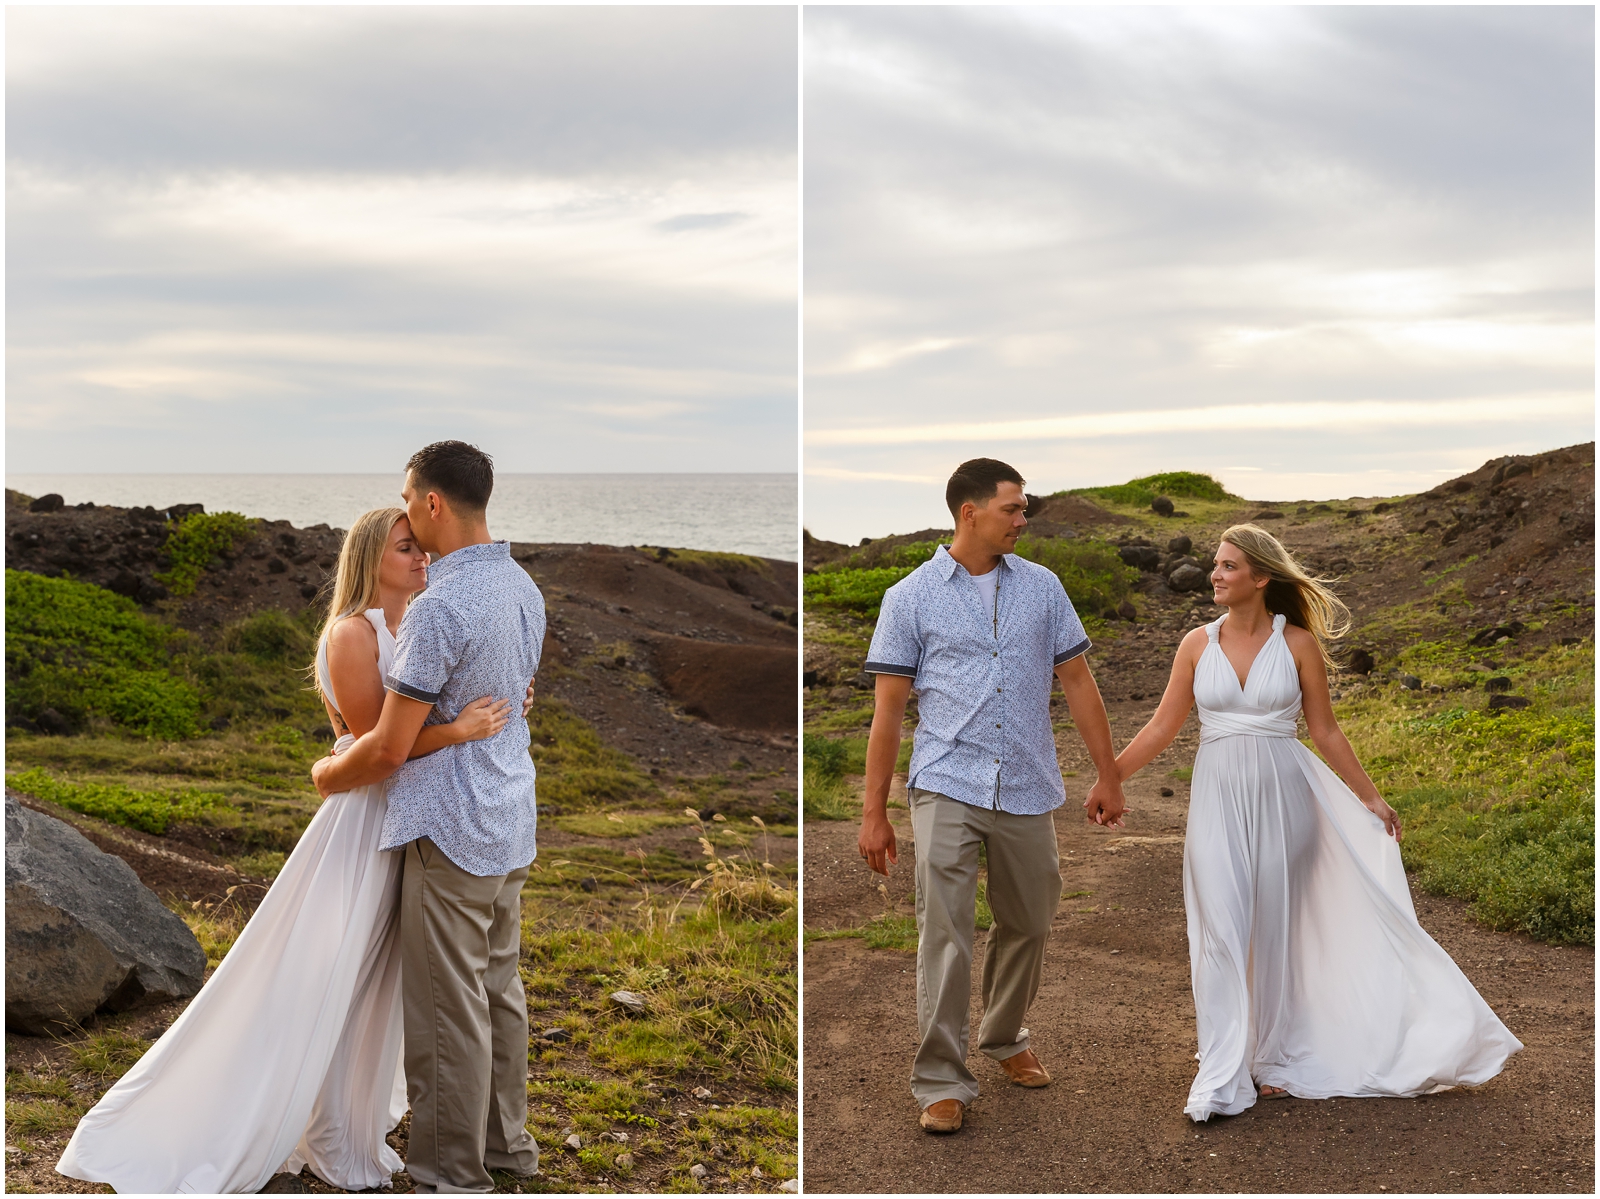 This couple eloped in Oahu, Hawaii.